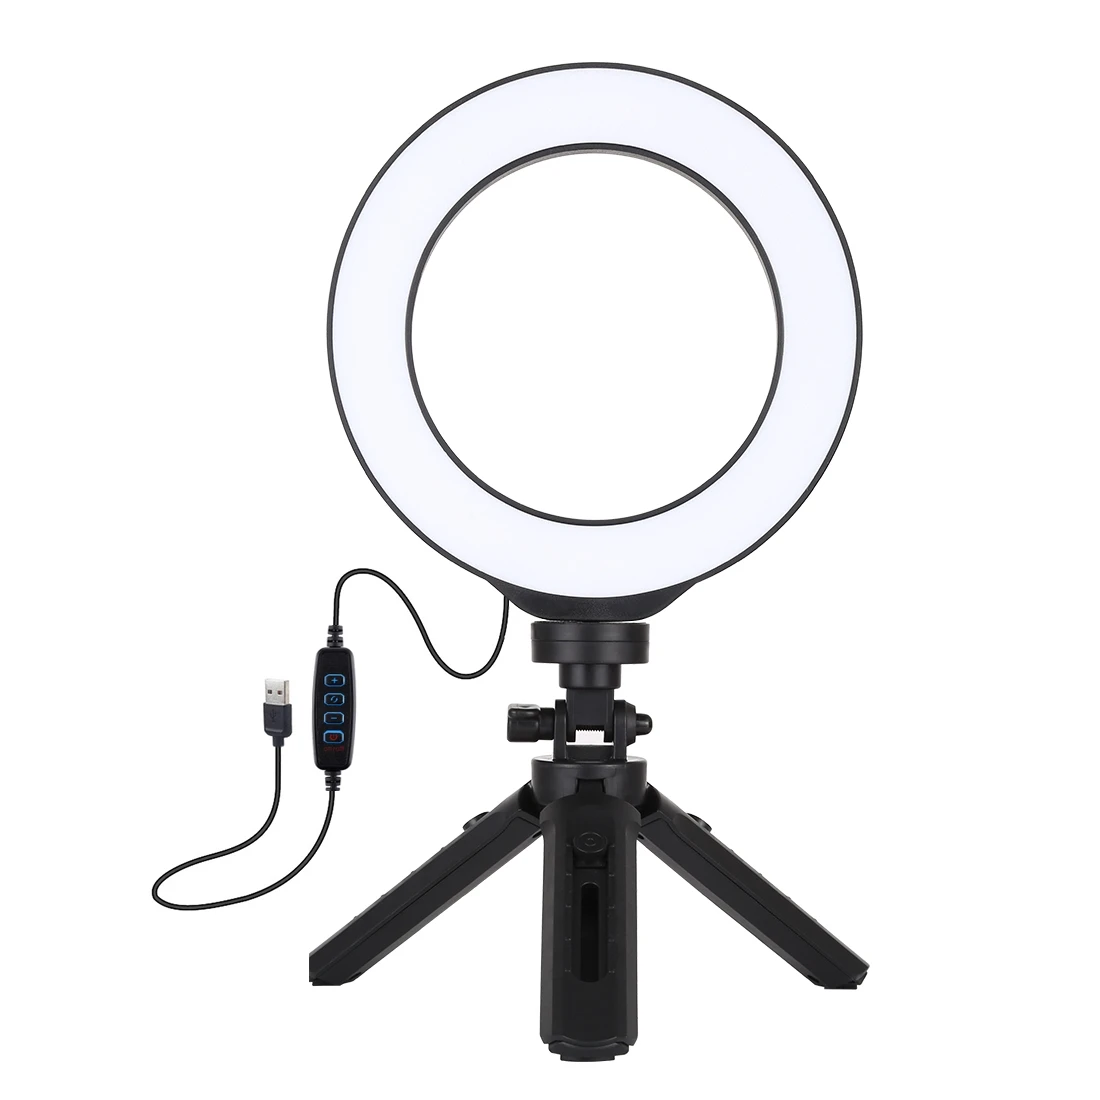 Kansai Canon macro ring light MR-14EX cheap 1 jpy start!! on this occasion  how about you?!! J465425 P: Real Yahoo auction salling